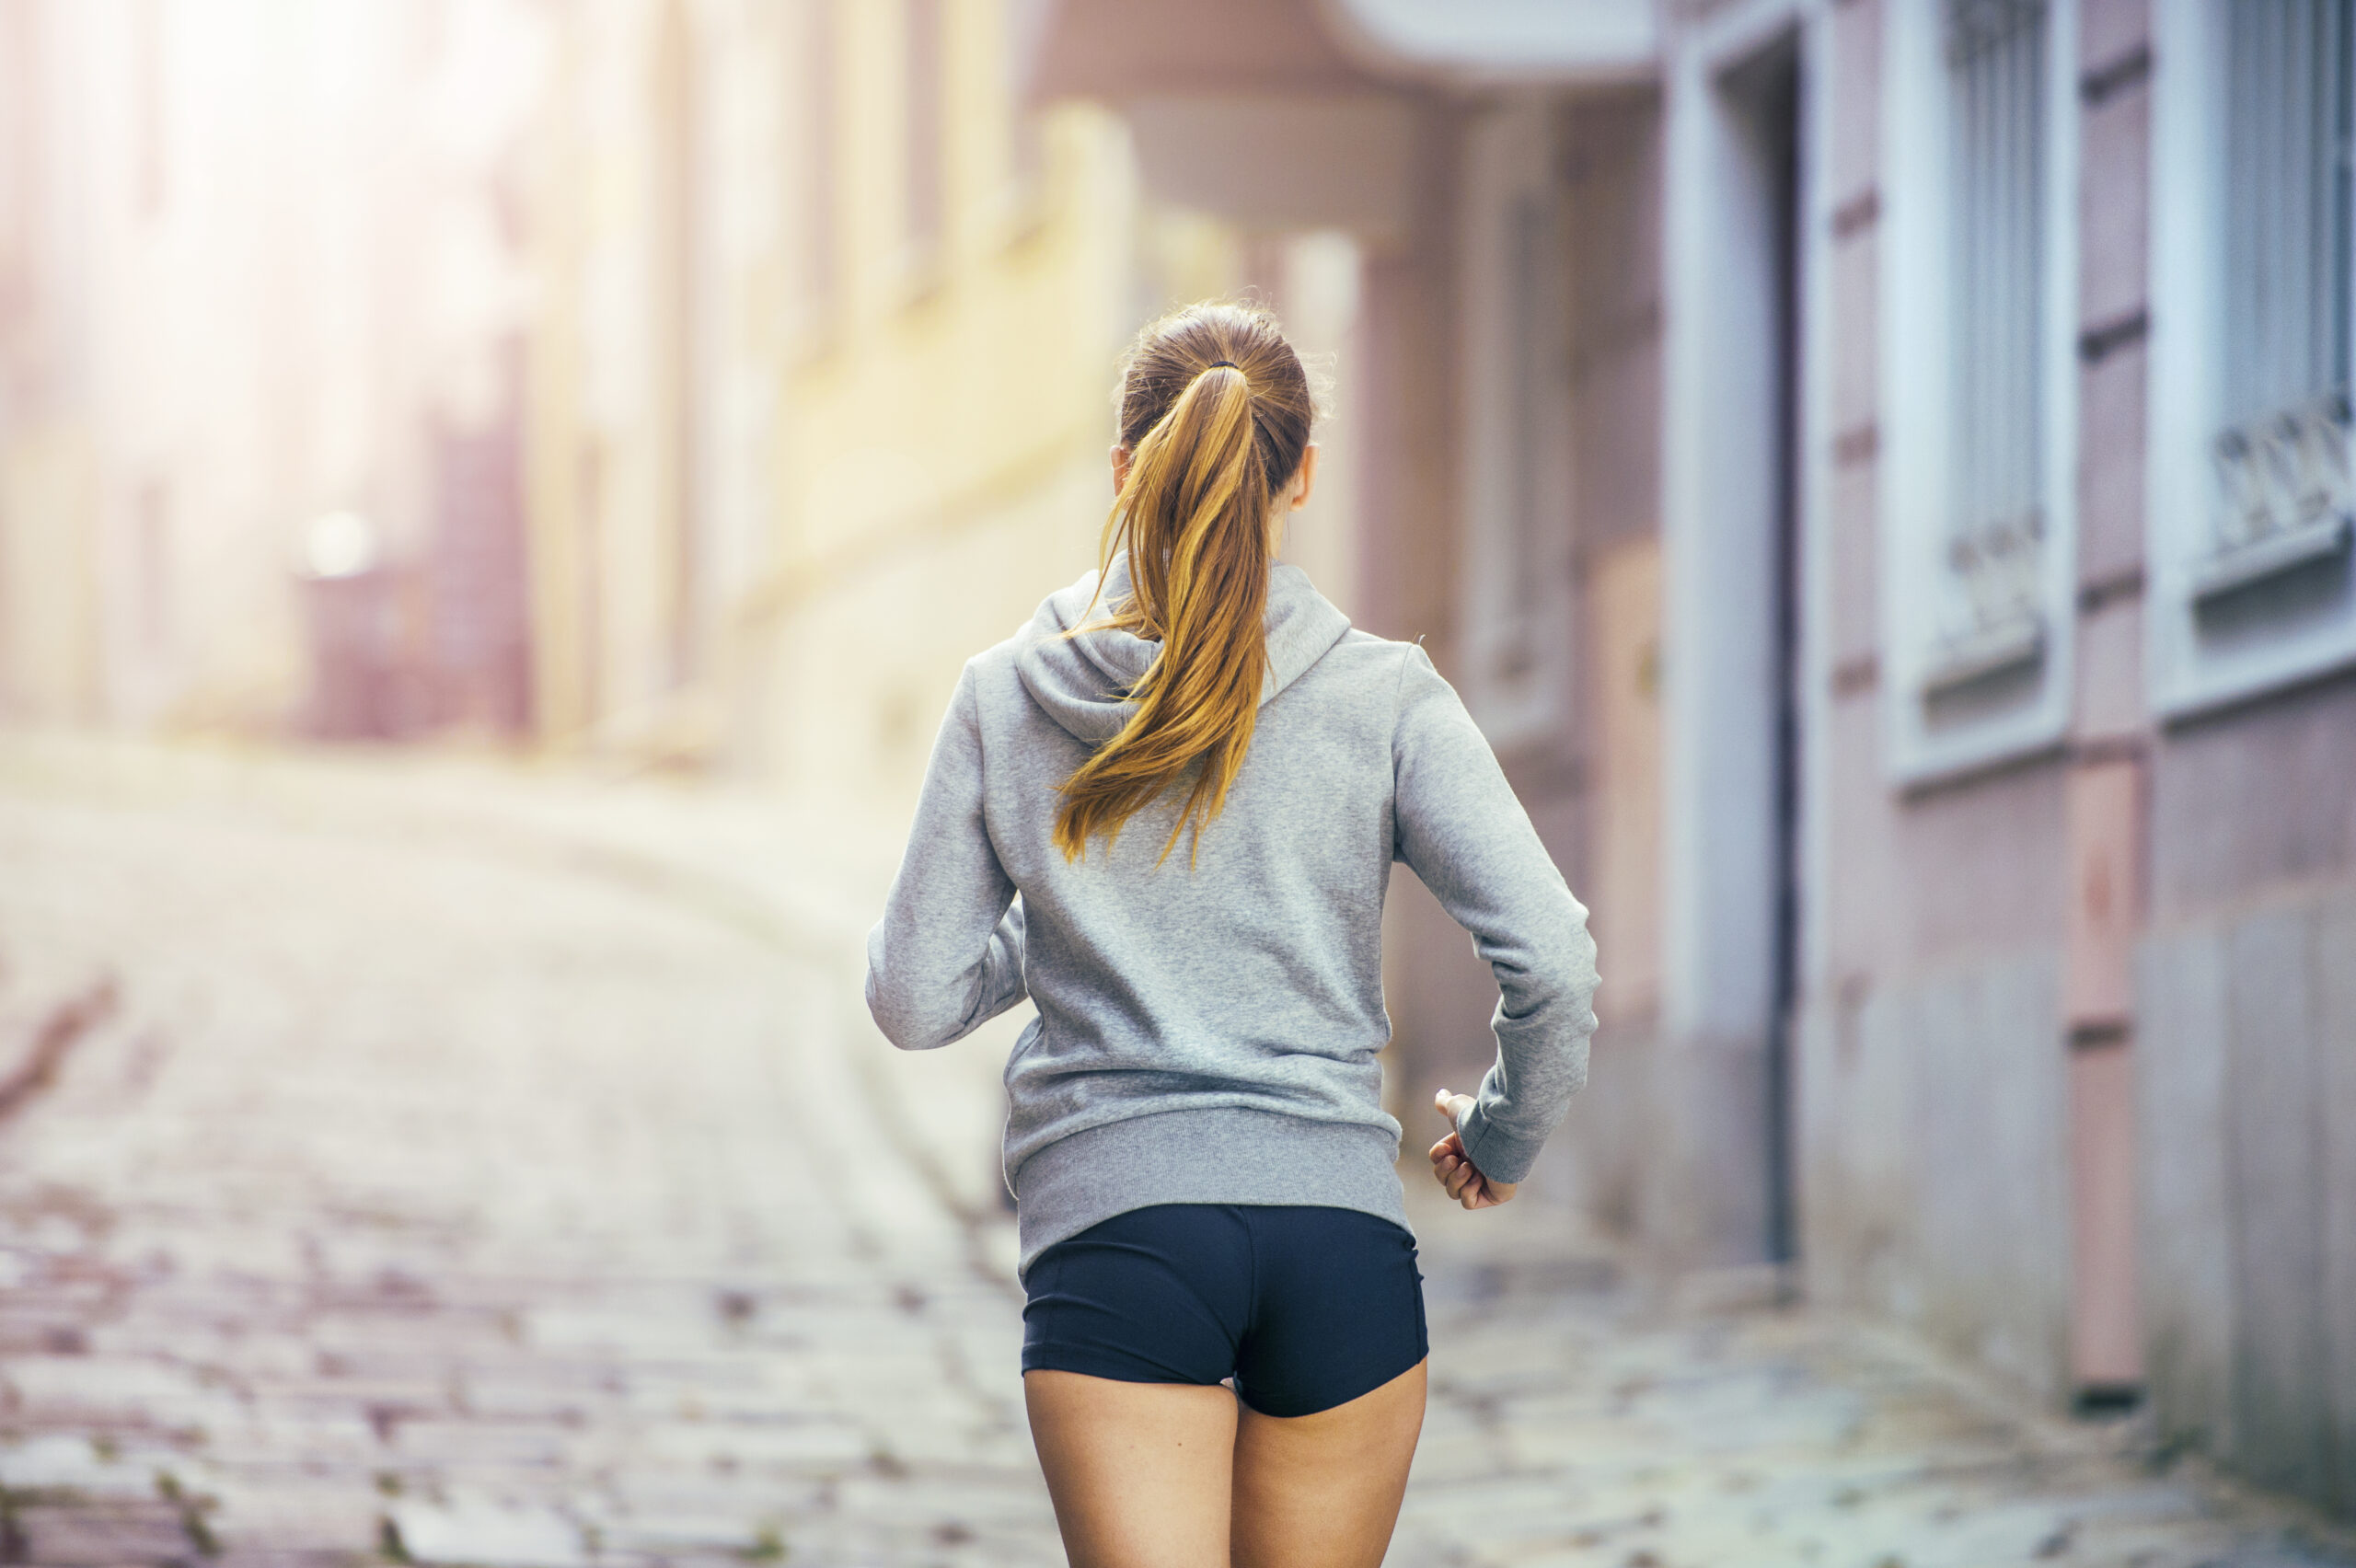 graphicstock-young-female-runner-is-jogging-on-tiled-pavement-old-city-on-center-healthy-lifestyle_r0eeUjb3bb-scaled Ditch the Fad Diets! 5 Effective and Safe Ways to Lose Weight